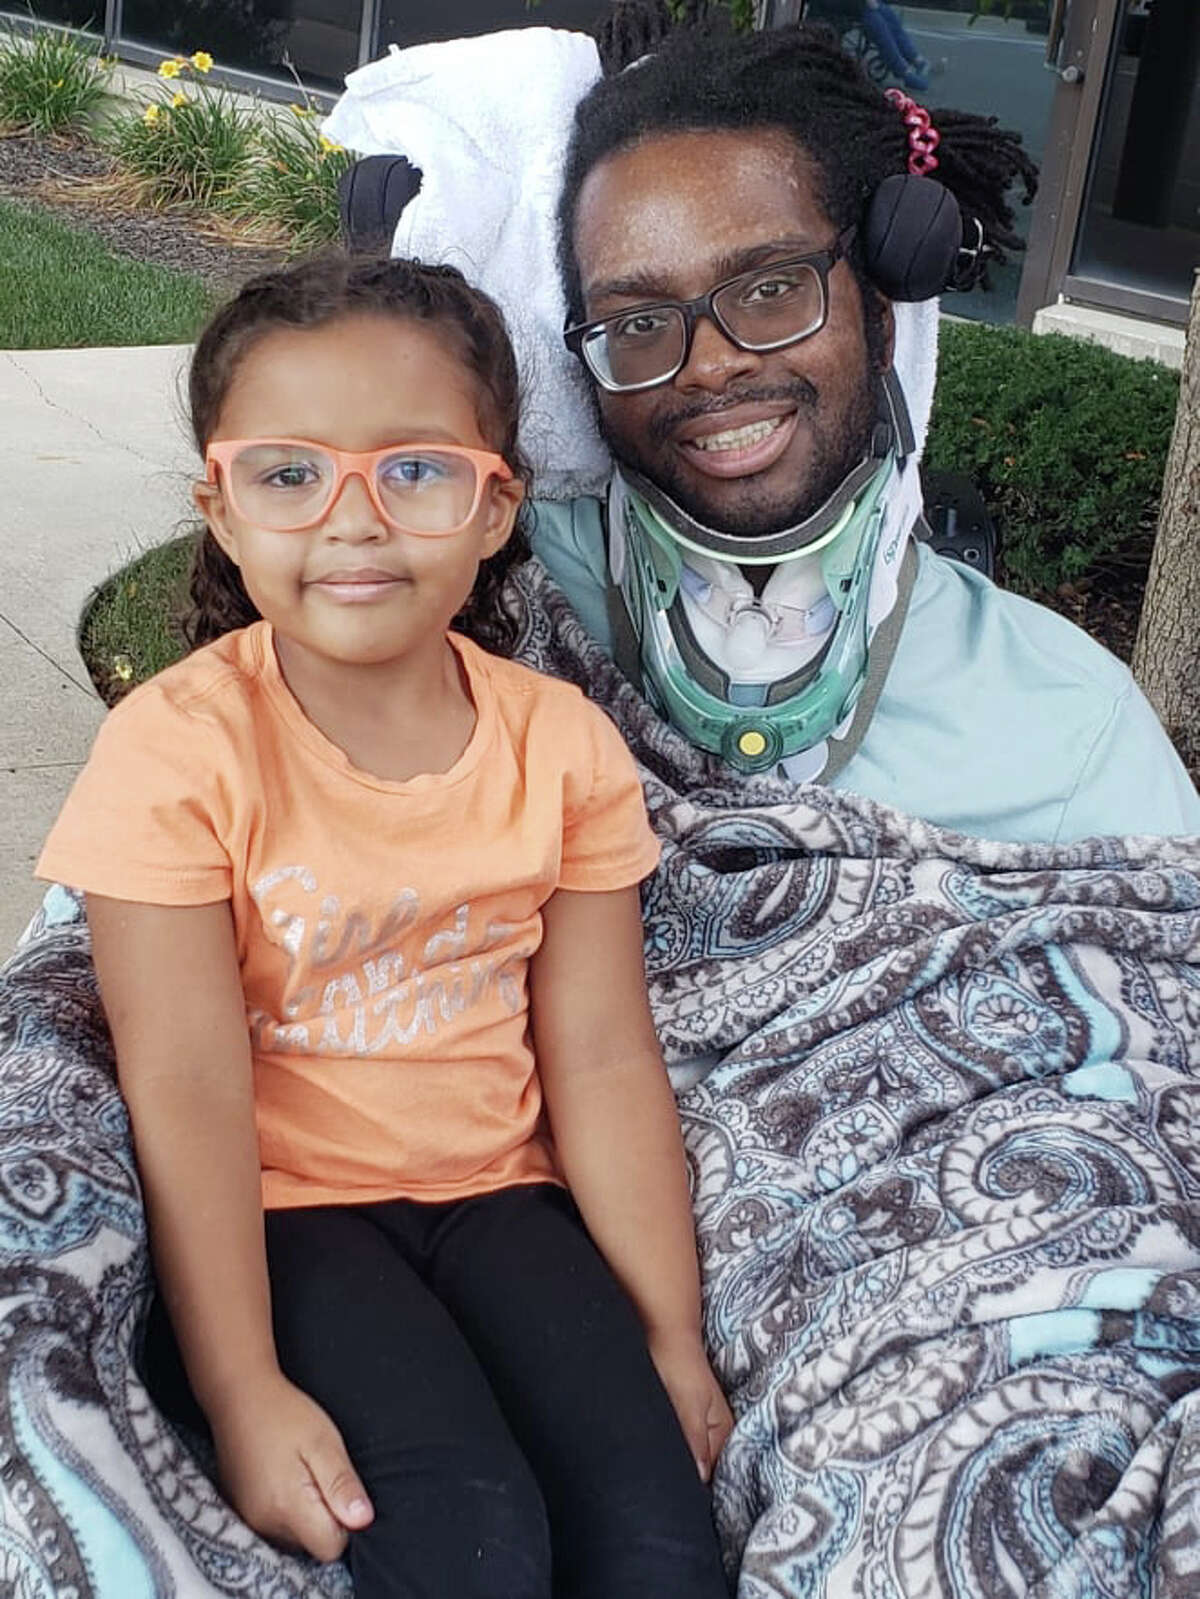 A'Shawny Sneed, a 2006 Big Rapids High graduate, is pictured sharing a smile with his daughter, Ahliya. Sneed was paralyzed from the shoulders down after a tragic car accident in August. His family has started a GoFundMe page in an effort to raise money with the goal of purchasing reliable transportation to take Sneed to and from doctor's visits.